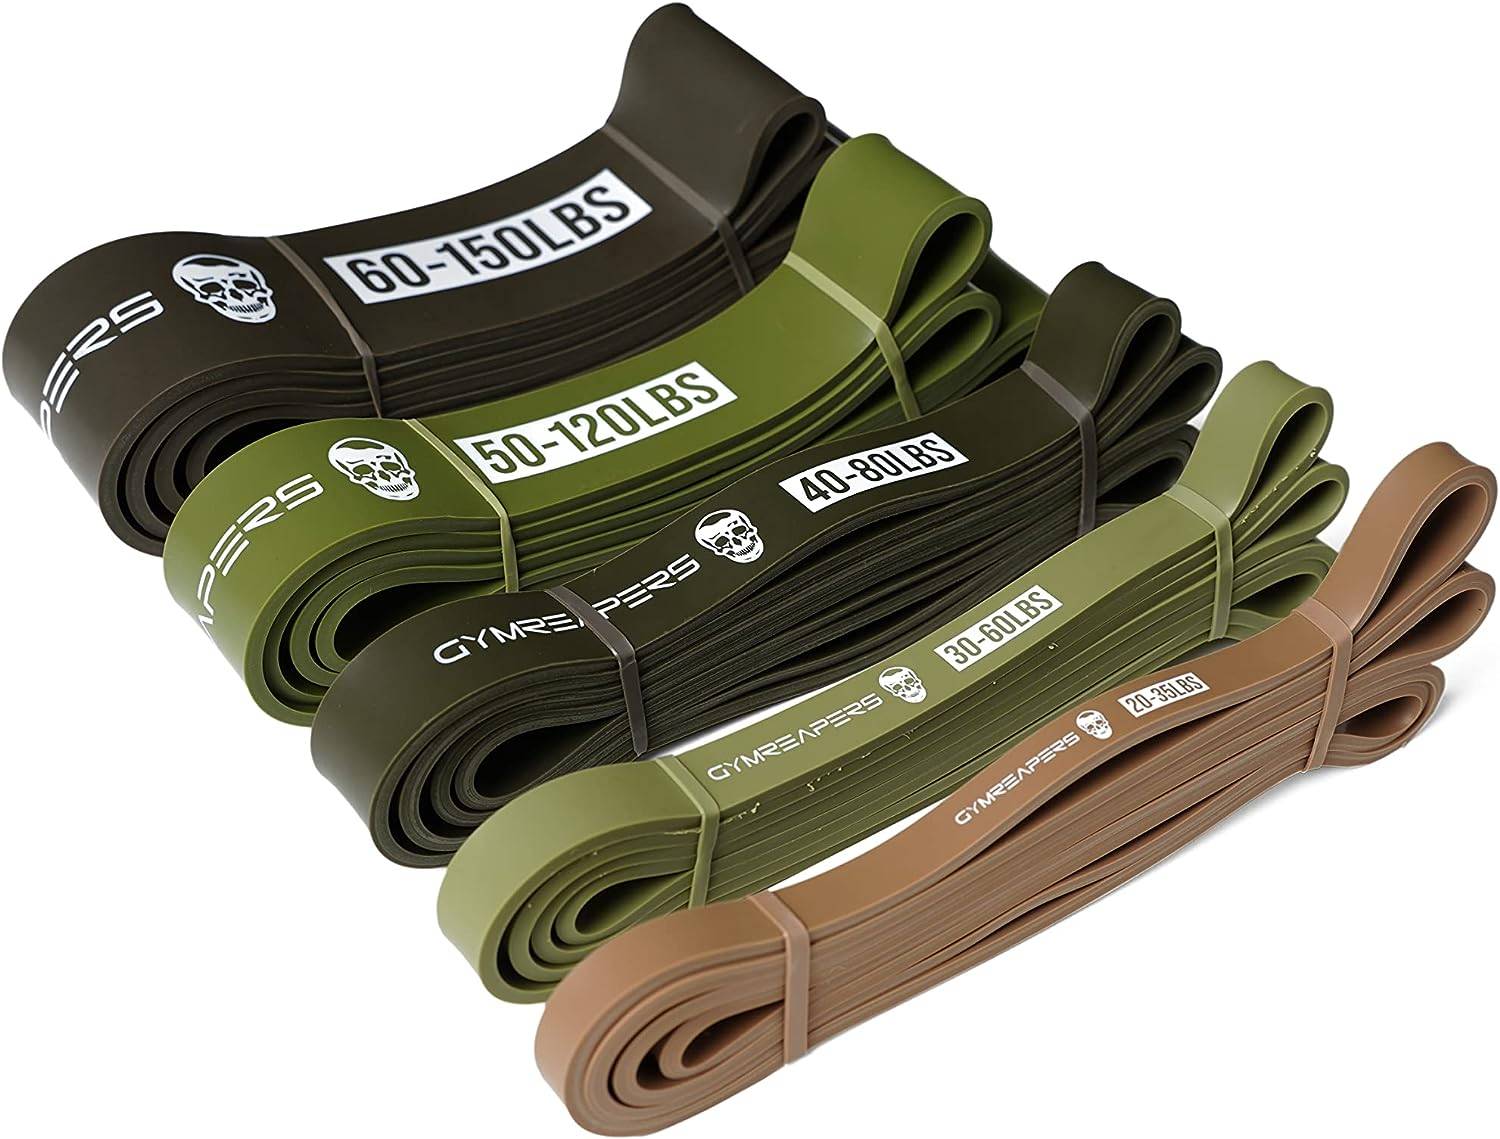 GYMREAPERS MILITARY RESISTANCE BAND SET